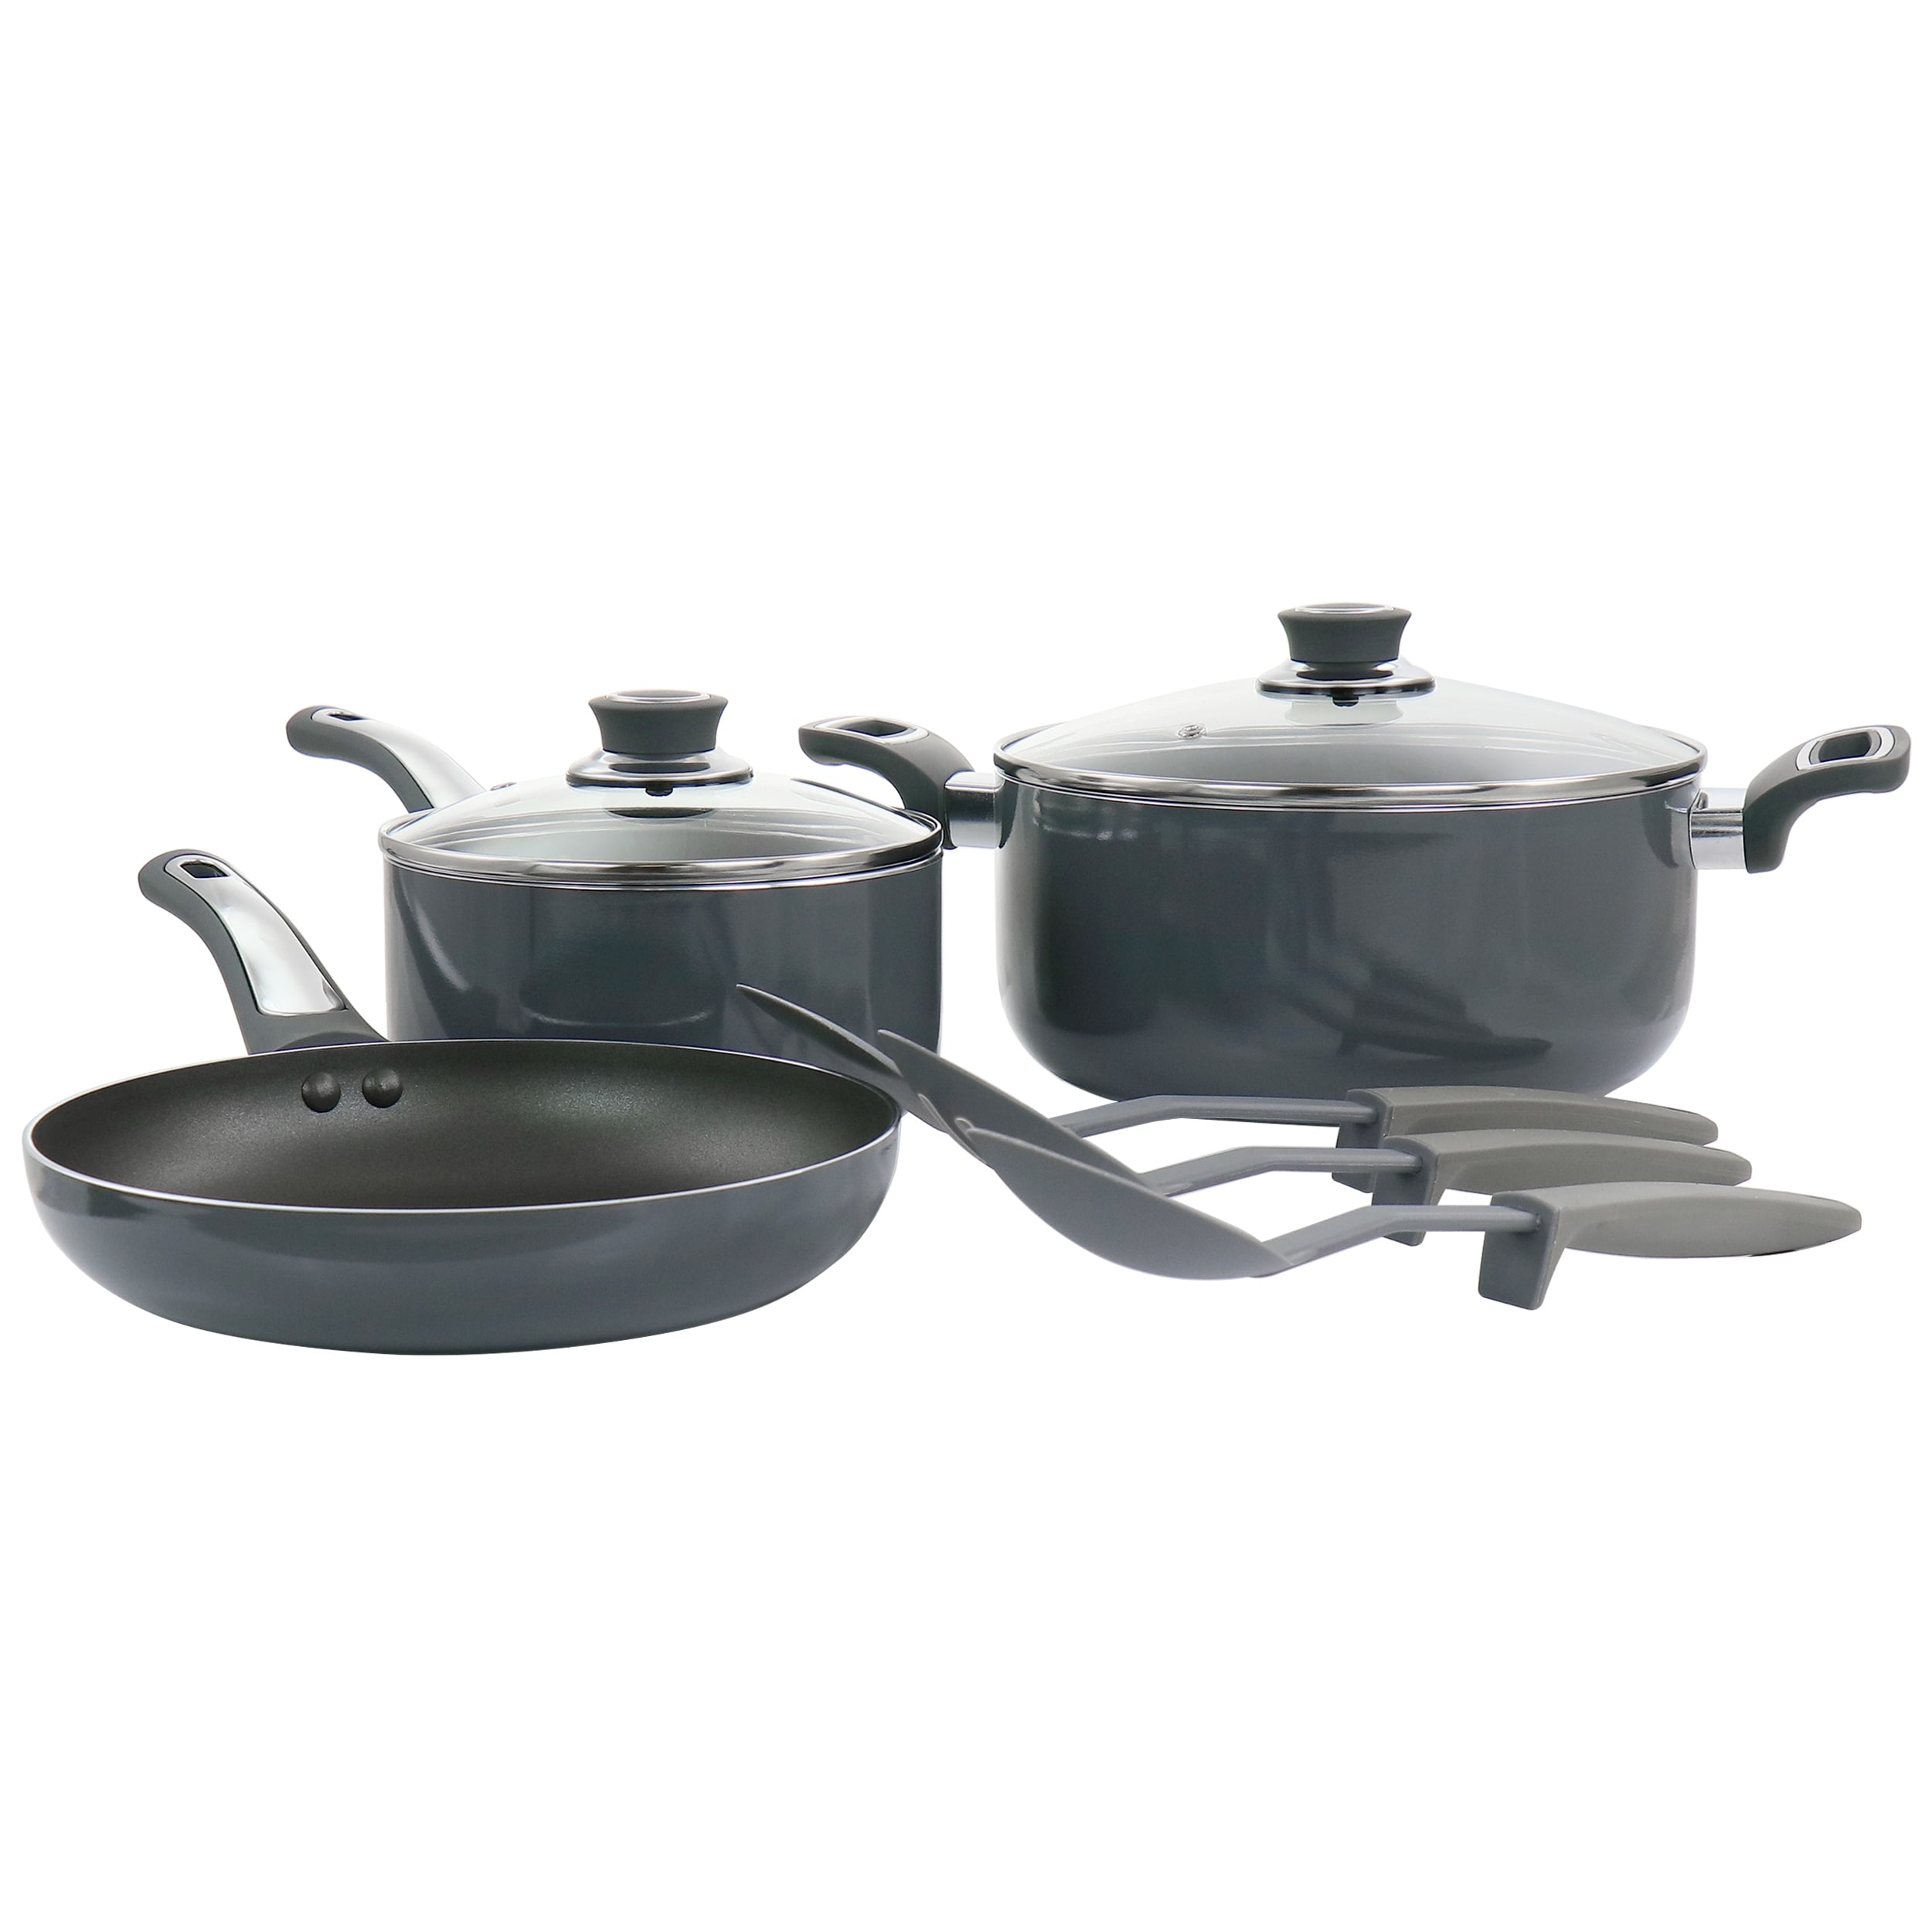 https://ak1.ostkcdn.com/images/products/is/images/direct/663da61d94c8b791cc56f3aa561b7489d5e8a8af/Oster-Legacy-8-Piece-Aluminum-Nonstick-Cookware-Set-in-Gray.jpg